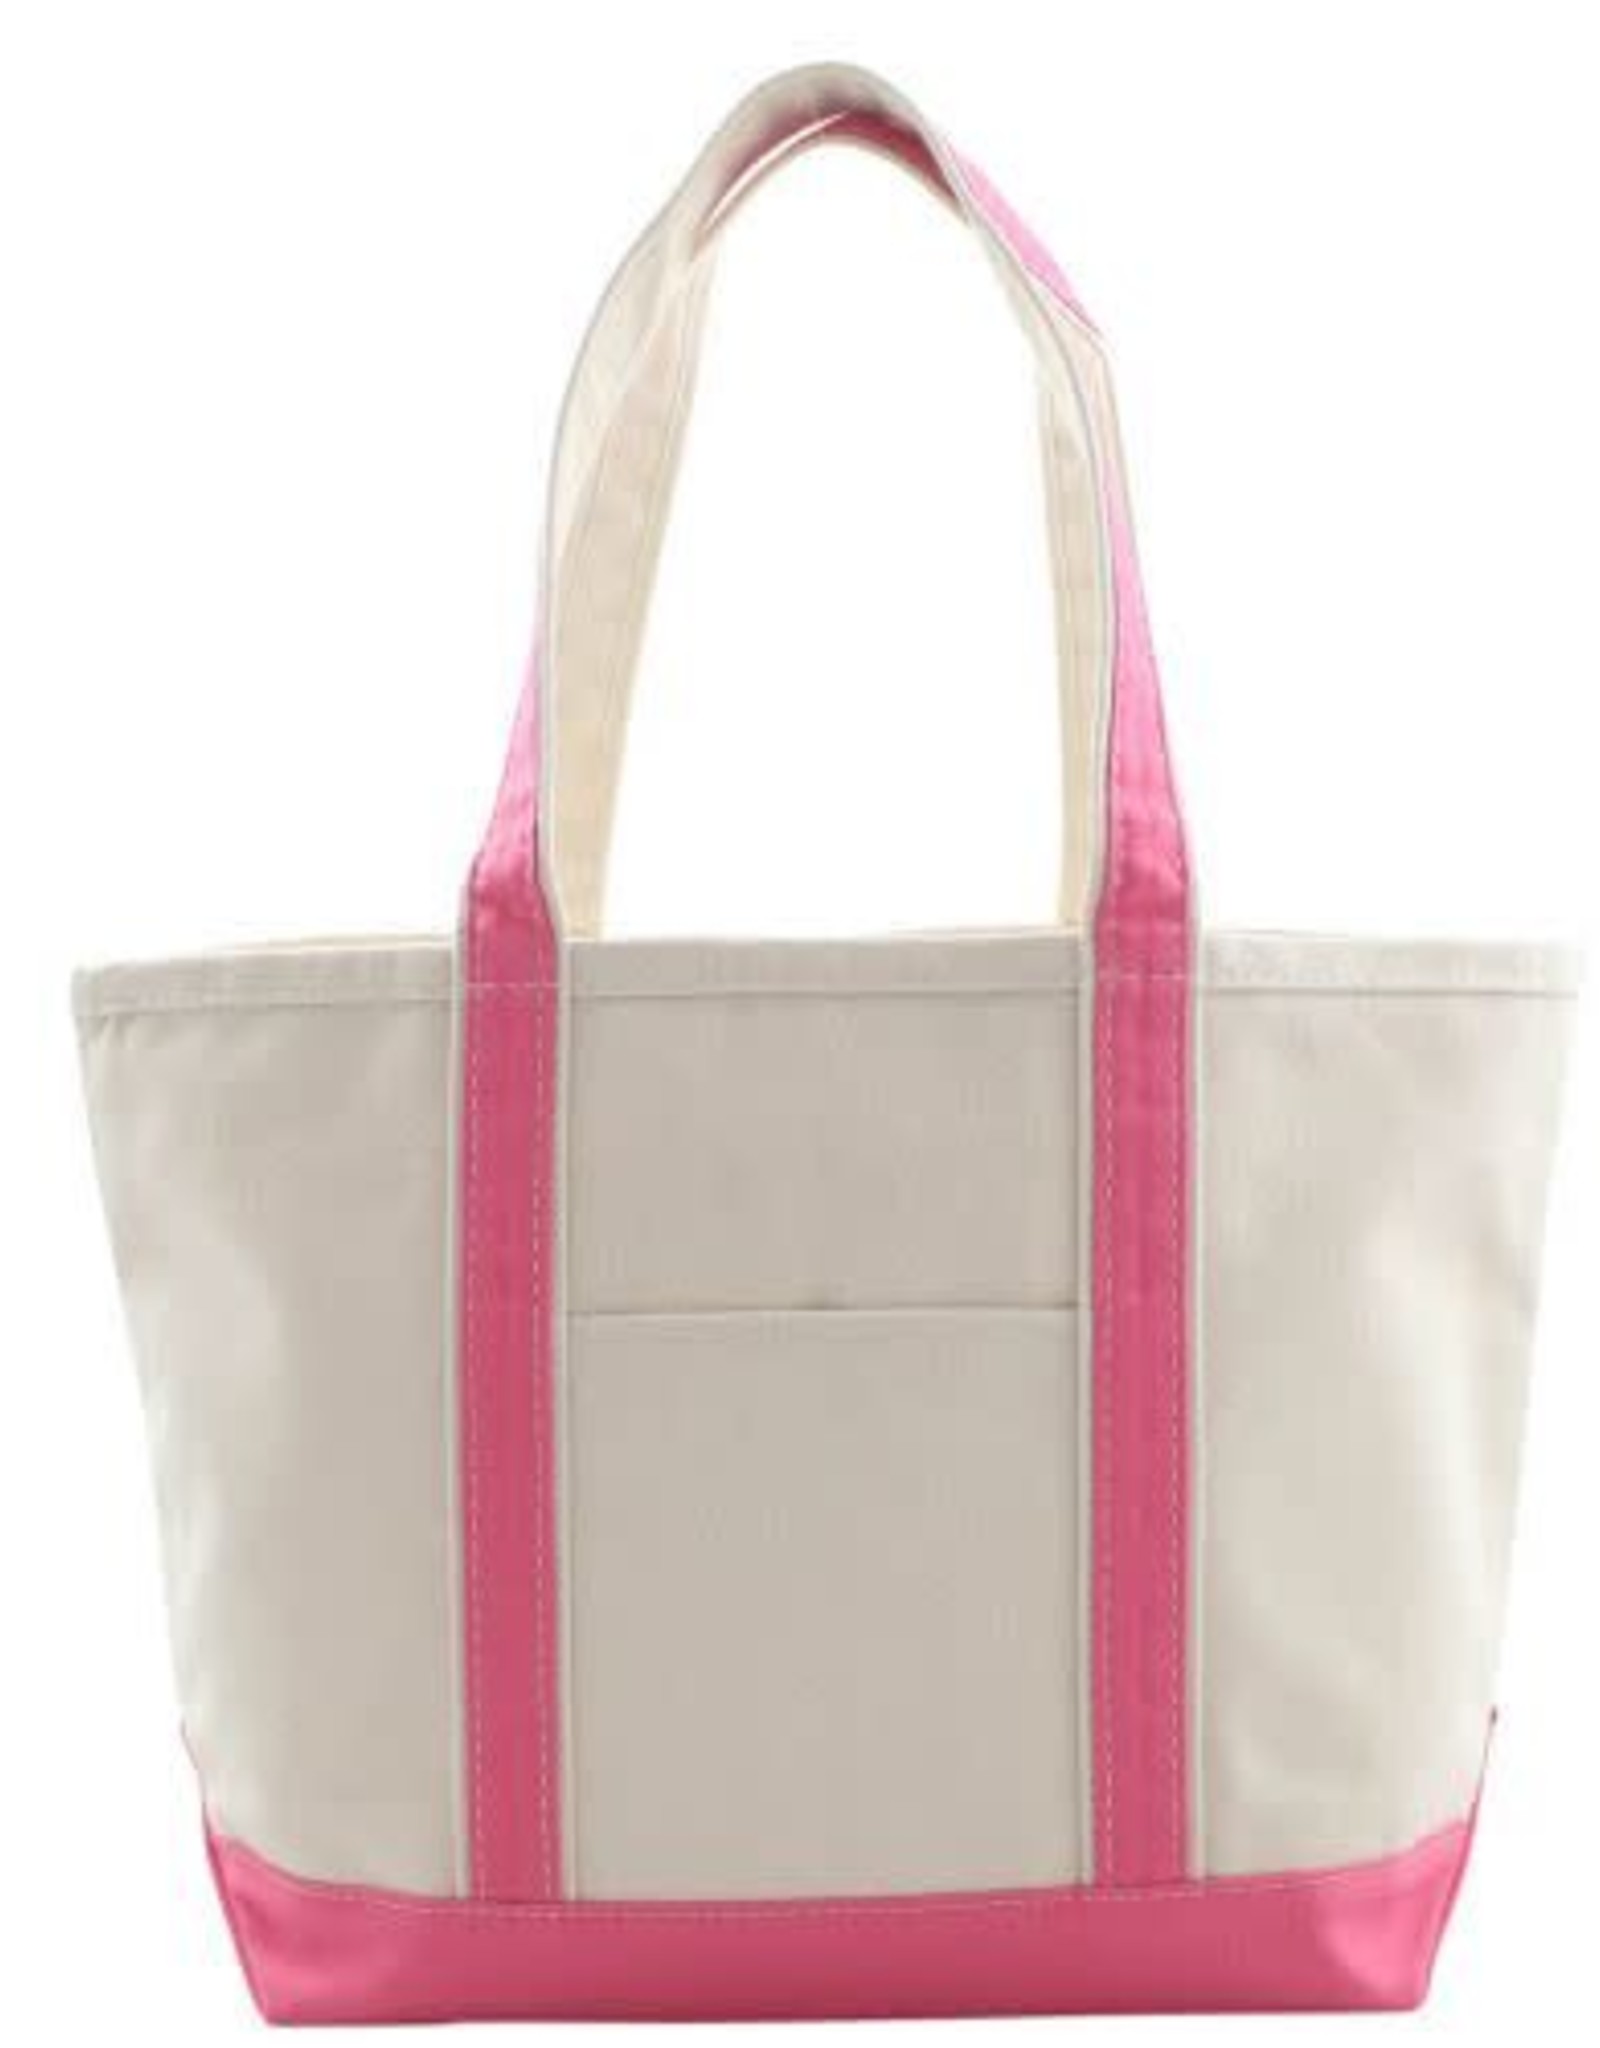 Hot Pink Trimmed Canvas Laundry Duffels by CB Station: More Than Paper